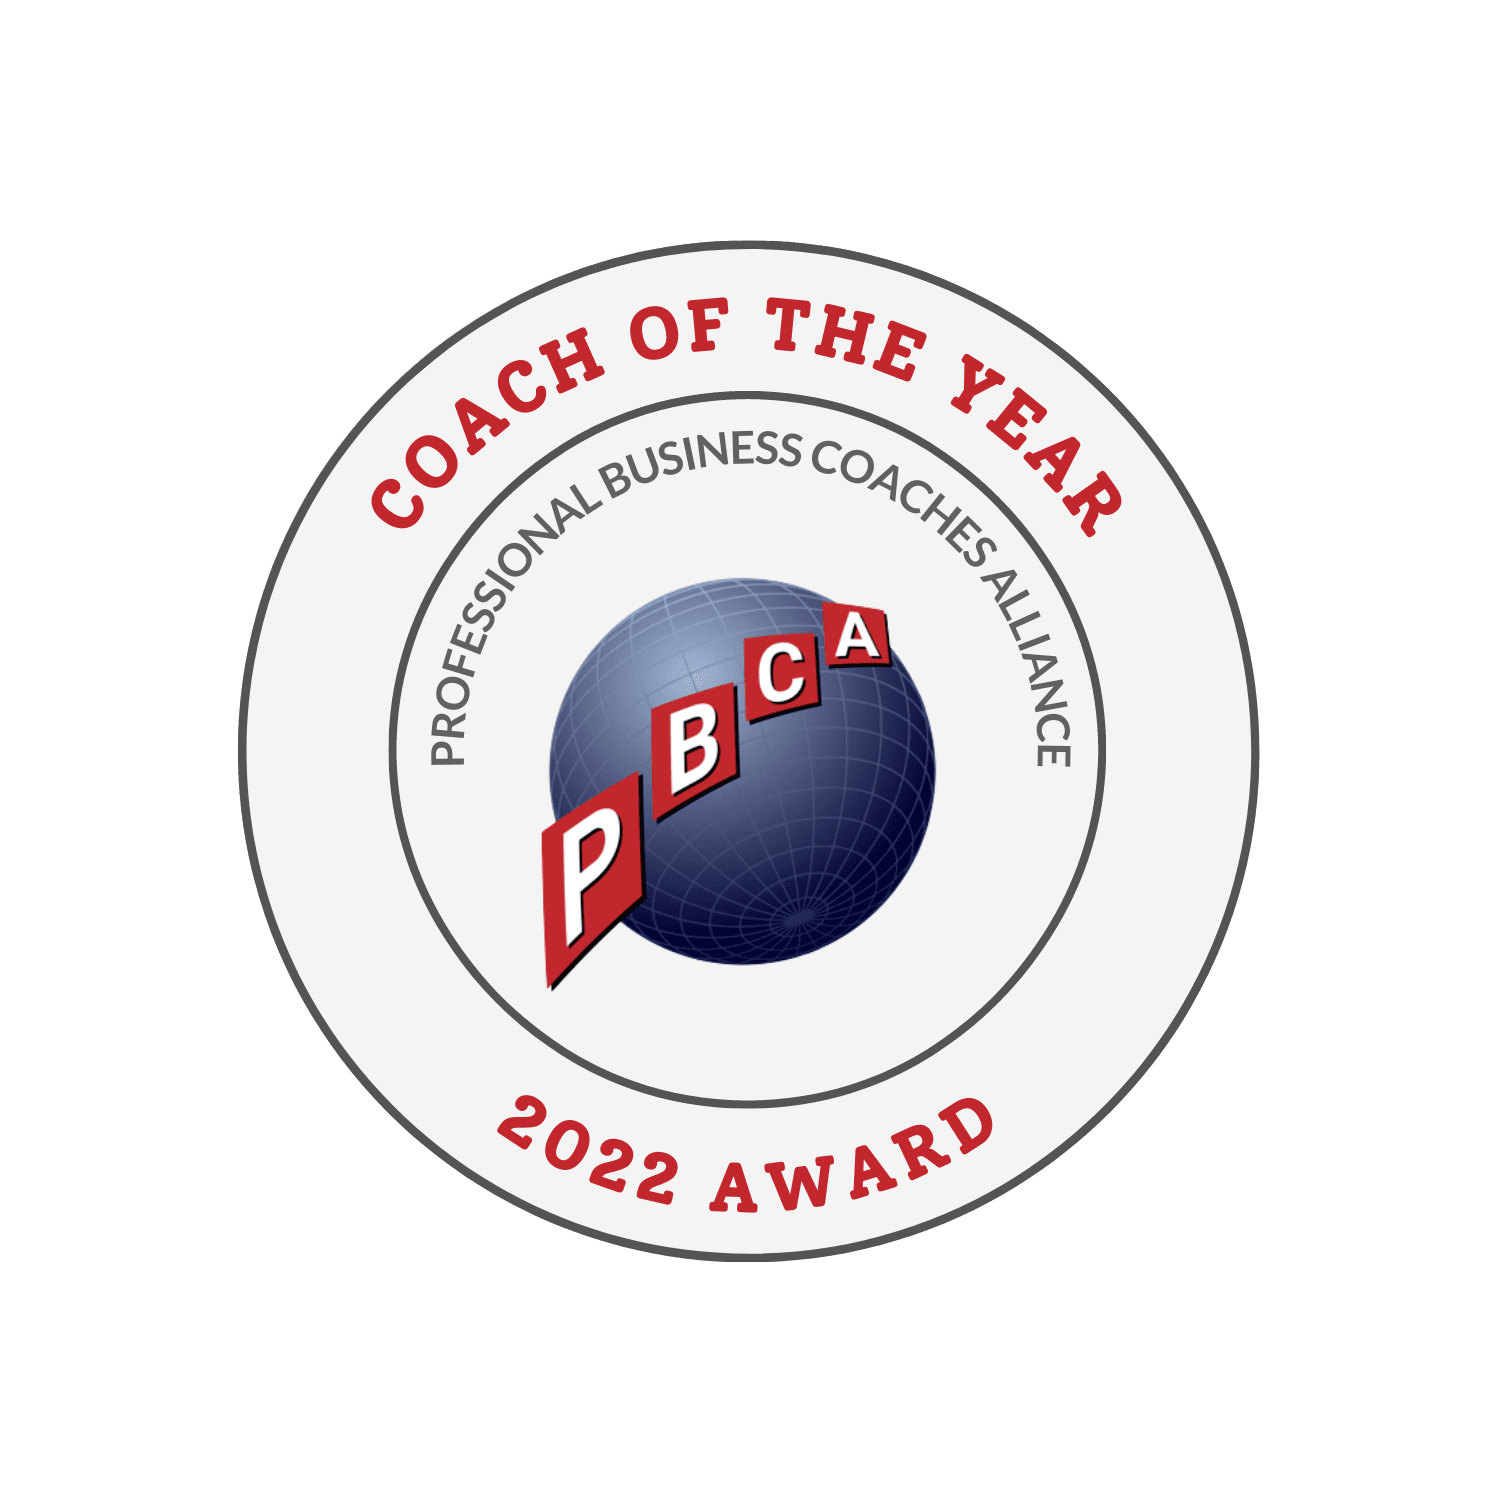 Professional Business Coaches Alliance announces Byron Skaggs as the 2022 recipient of the PBCA Coach of the Year Award.